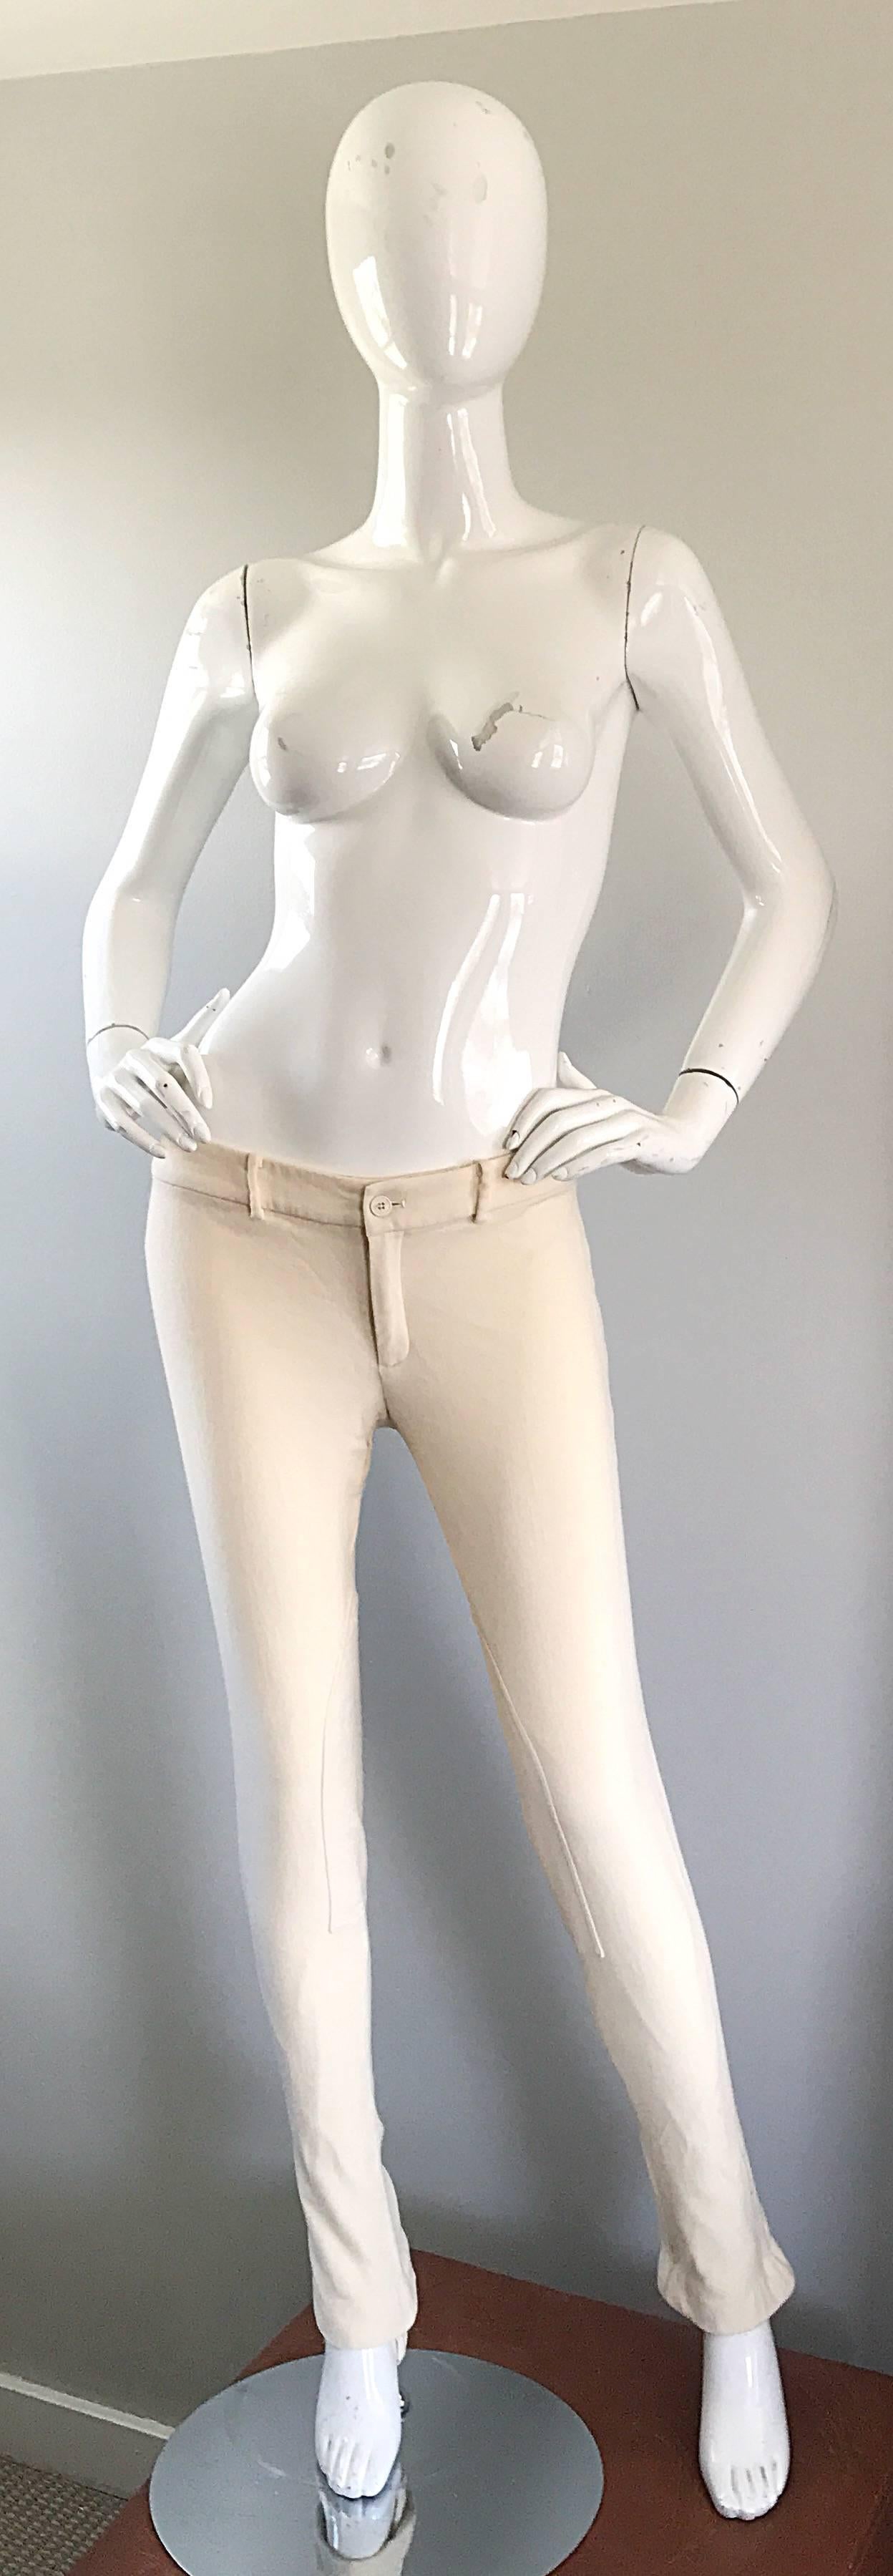 Classic and stylish 1990s RALPH LAUREN COLLECTION Purple Label ivory / winter white virgin wool slim fit stirrup jodhpurs/ trousers! Low rise fit, with a skinny leg, and stirrups at the bottom of each leg opening. Features soft virgin wool, with